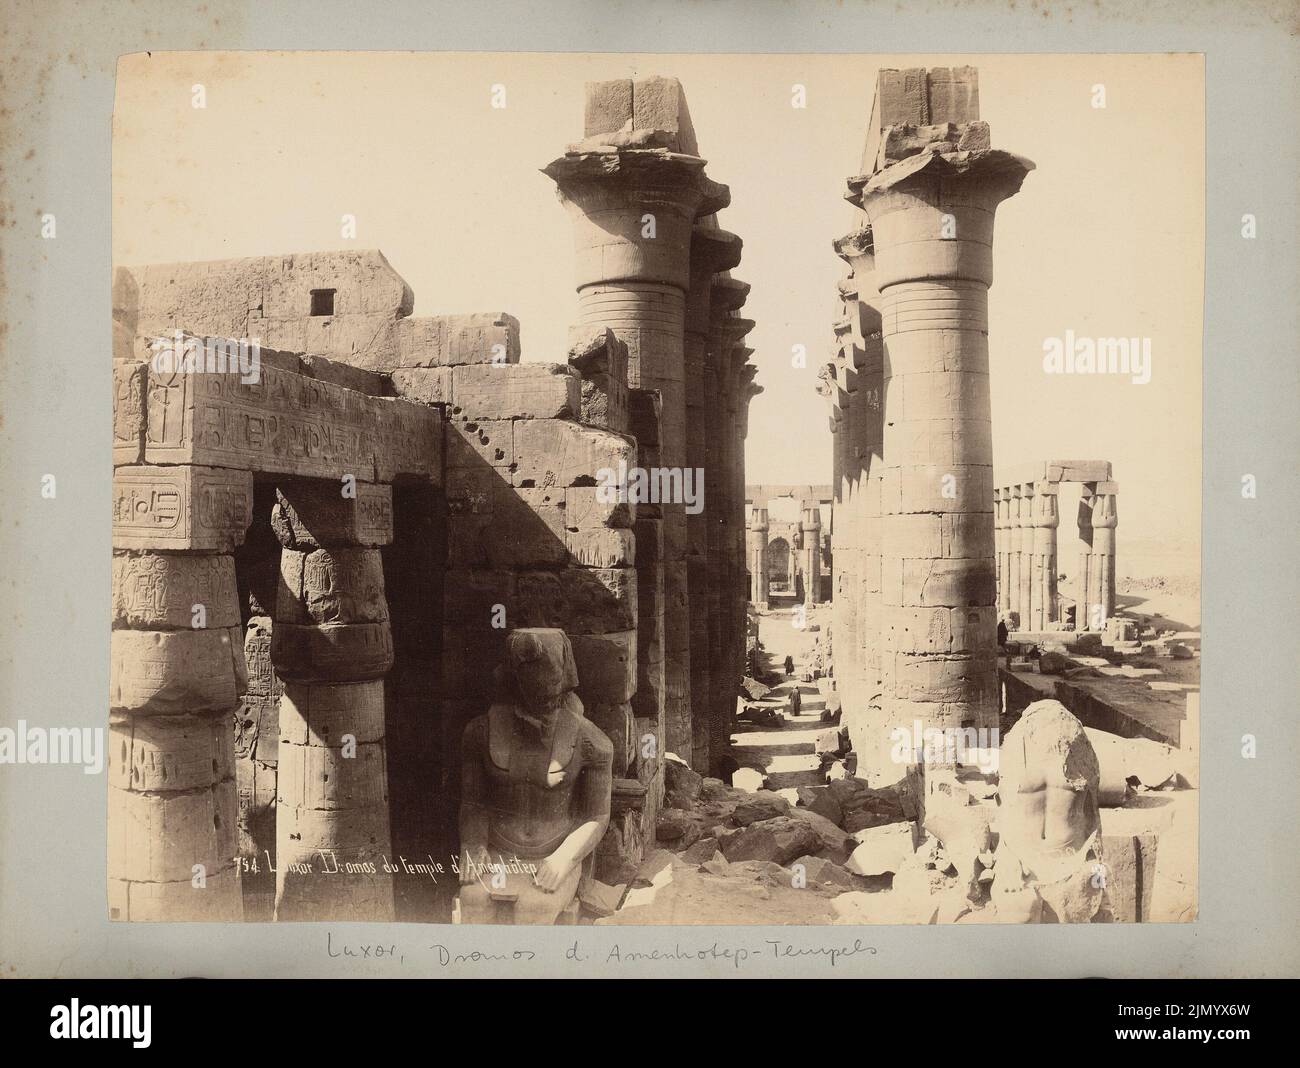 Sebah Jean Pascal (1823-1890), Dromos of the Amenhotep Temple, Luxor (without Dat.): View into the column, in the foreground. Photo on cardboard, 24.4 x 32.4 cm (including scan edges) Stock Photo